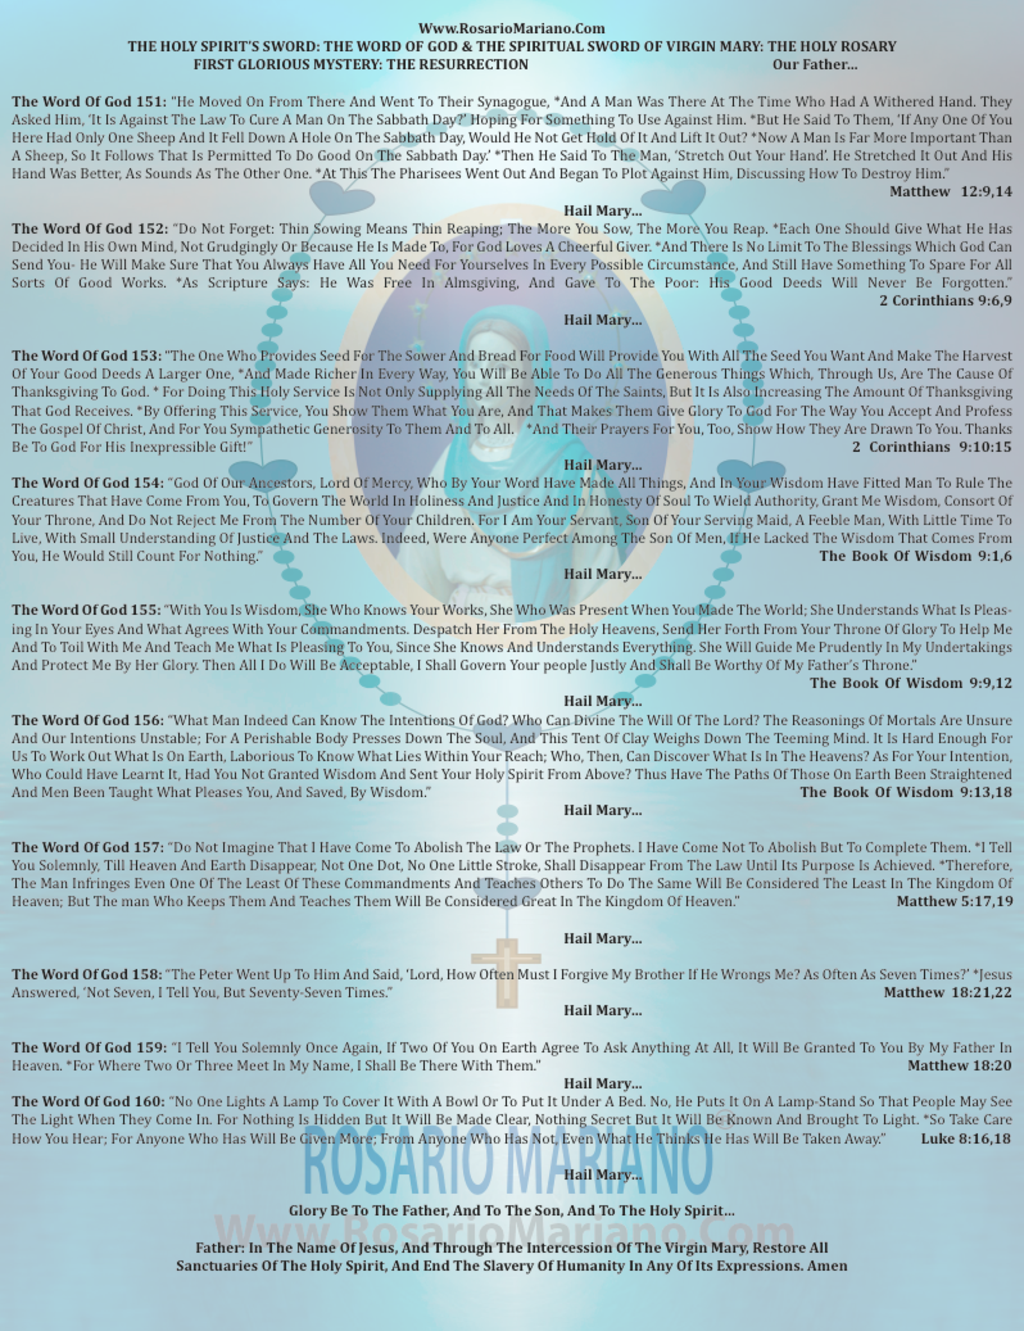 THE SWORD OF THE HOLY SPIRIT THE GOSPEL OF THE LORD, THE SPIRITUAL SWORD OF VIRGIN MARY: THE HOLY ROSARY; WELDED HERE BY TH HEARTS PRAY OF ROSARIO MARIANO FIRST MYSTERY THE RESURRECTION BIBLE